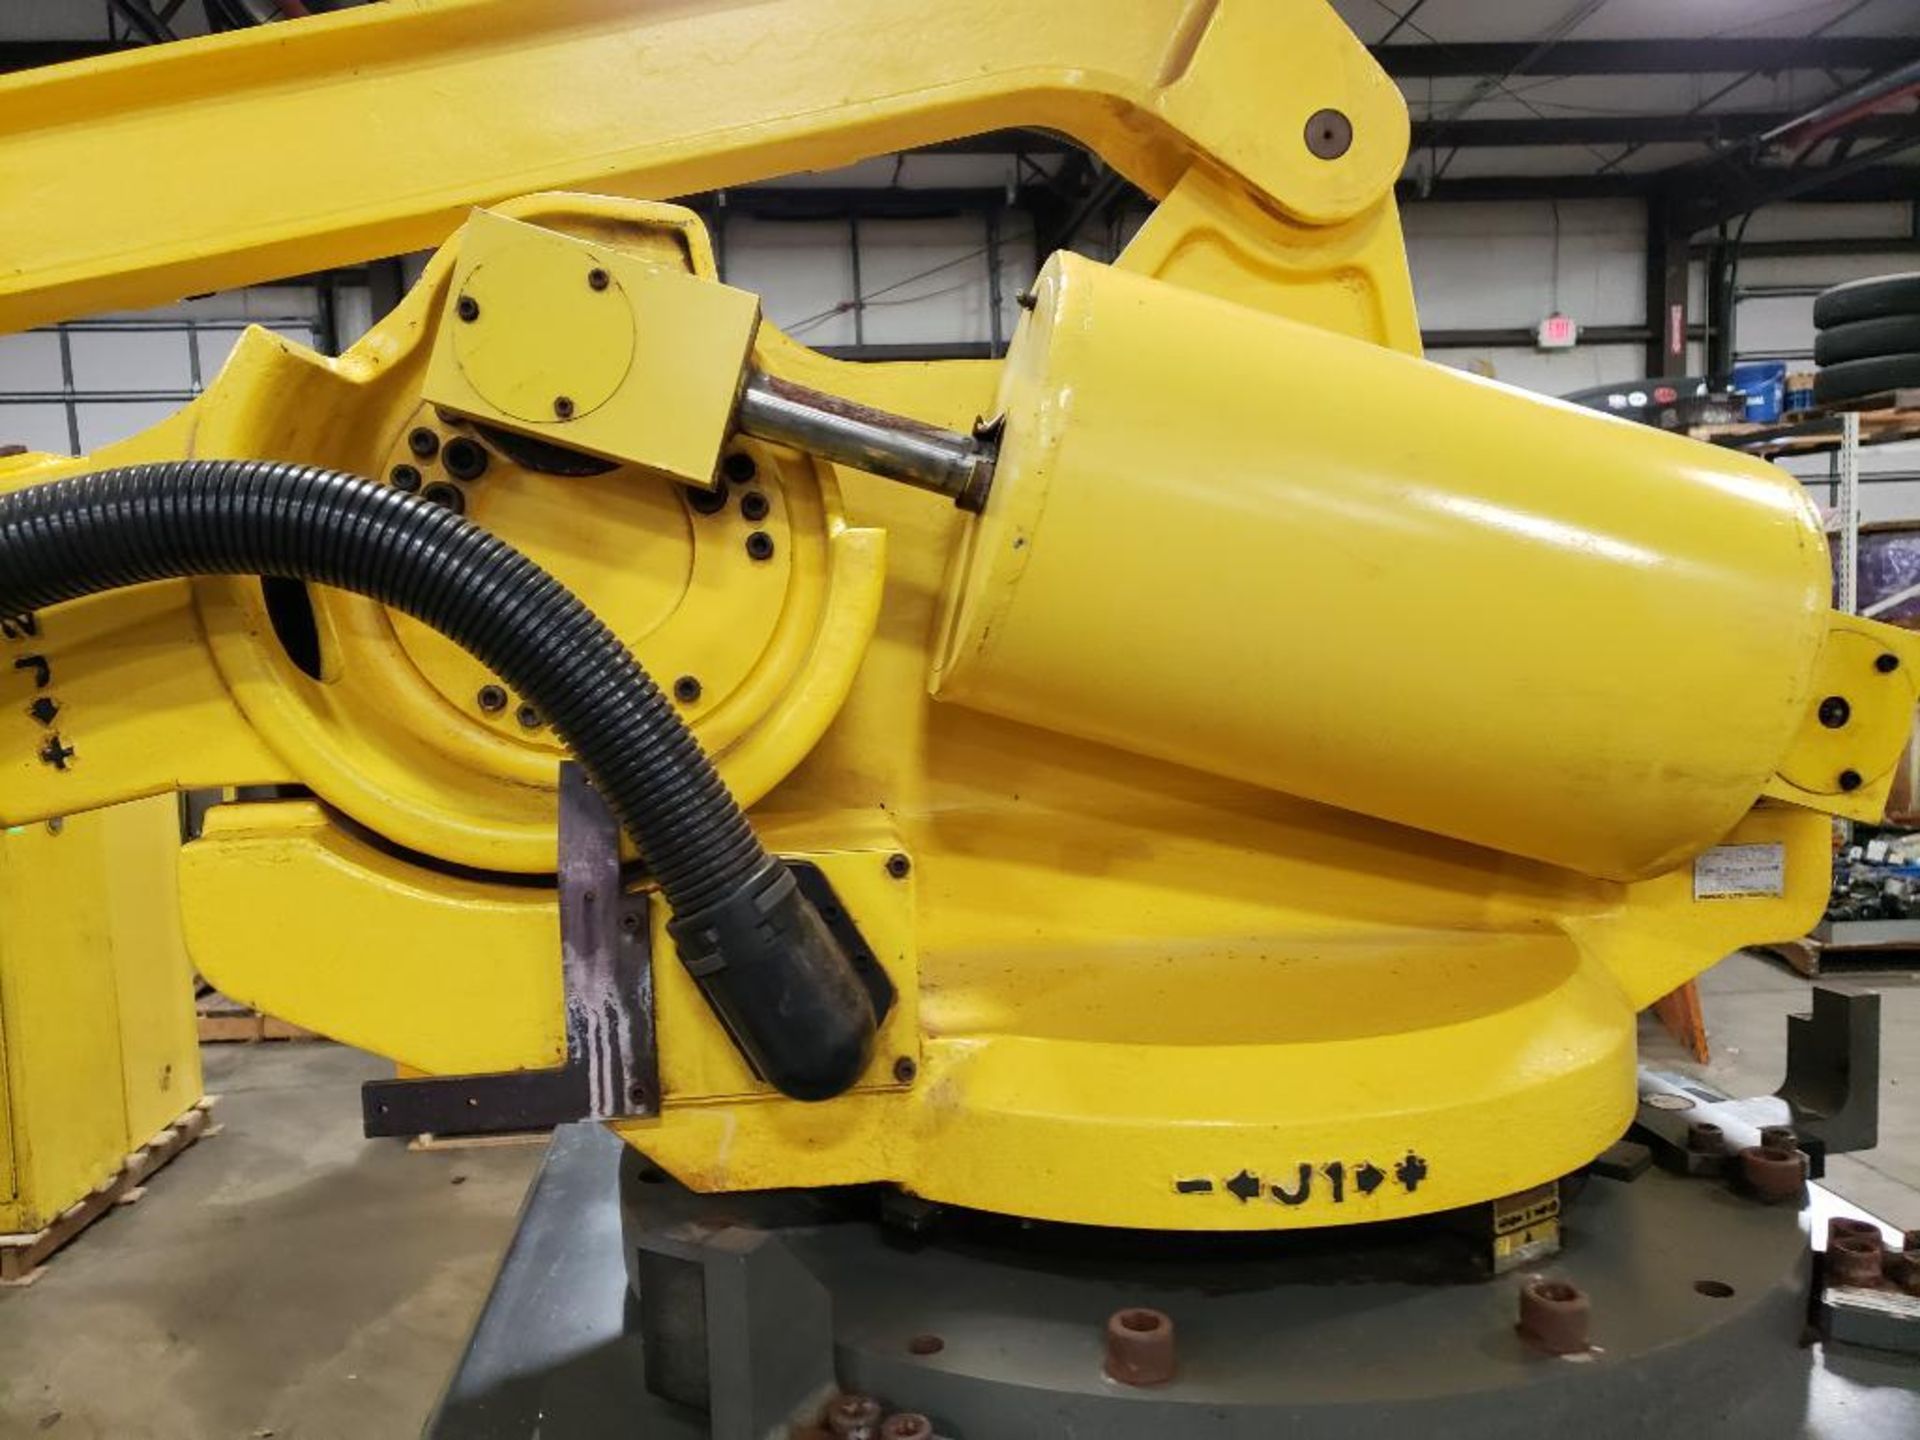 Fanuc M-410i HW robot arm. Does not include controller or cables. (cables have been cut) - Image 21 of 27